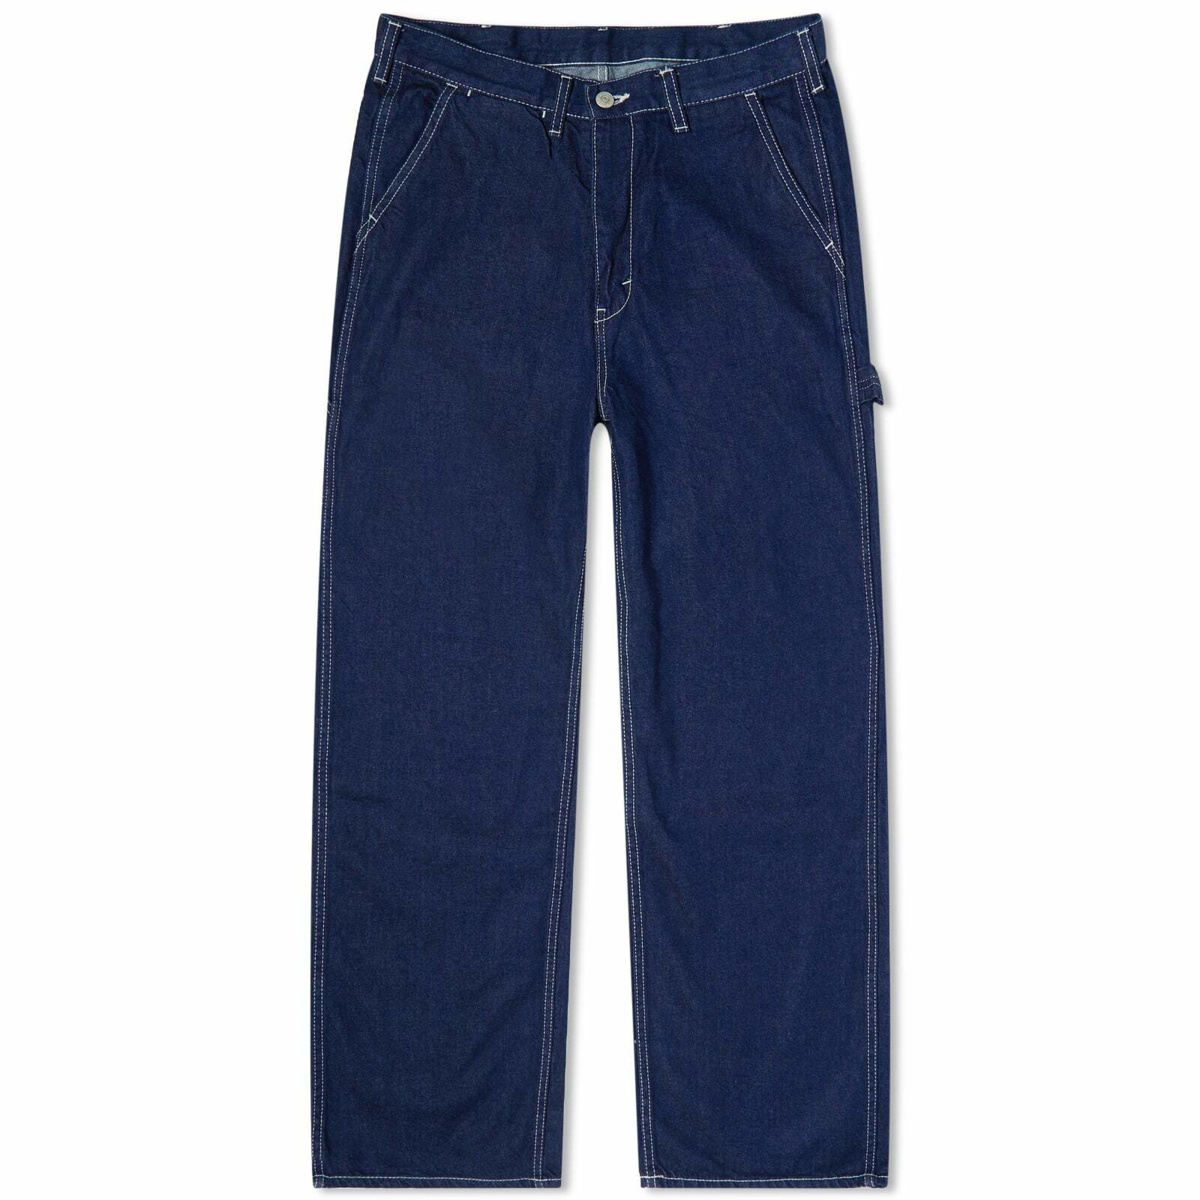 WOMEN'S JW ANDERSON RELAXED PAINTER PANTS